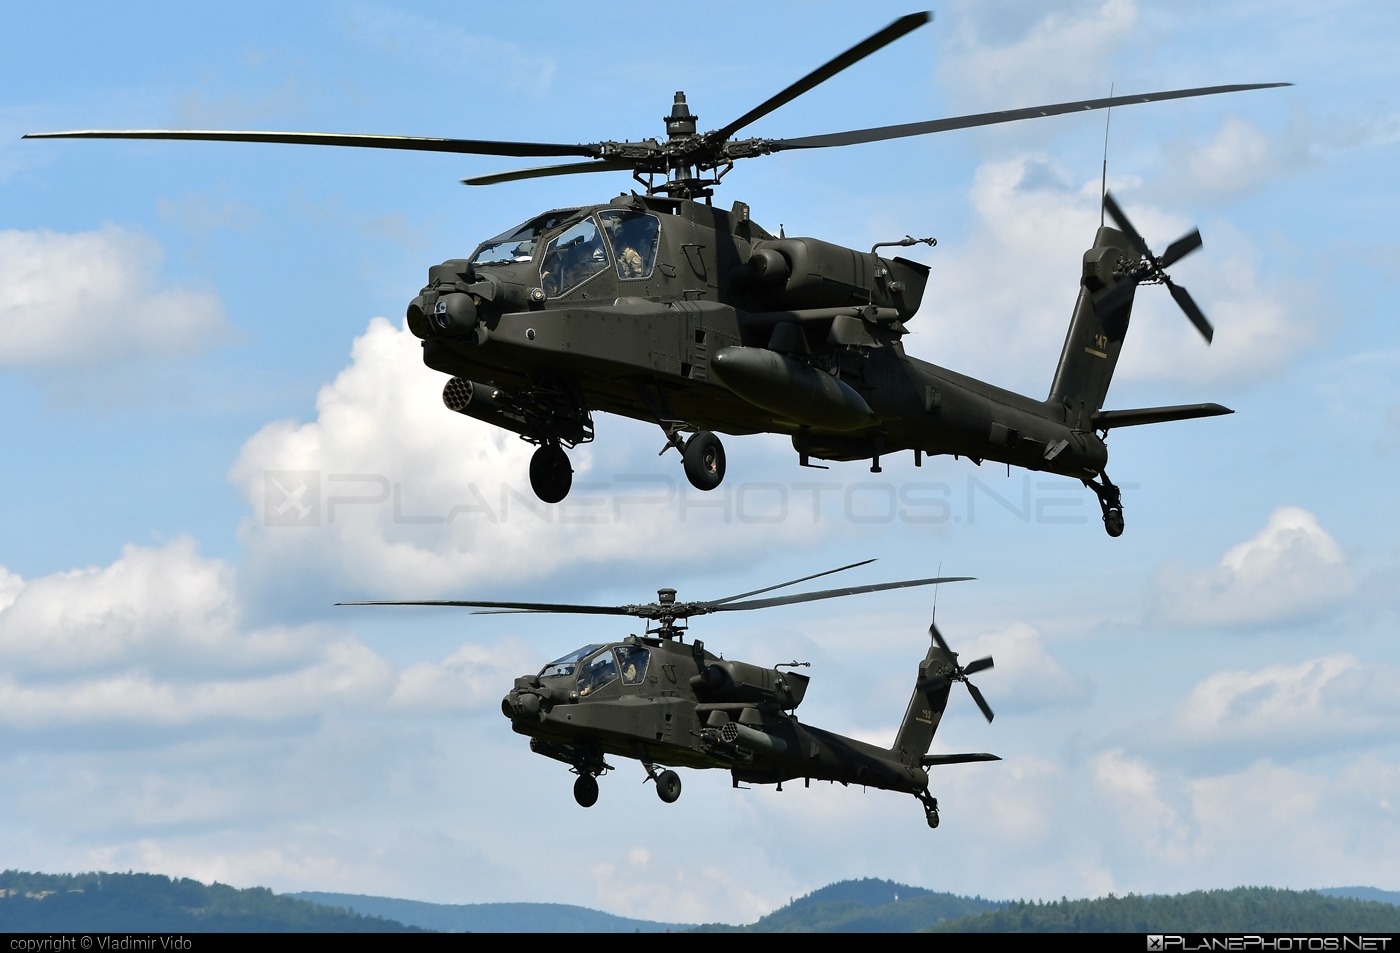 17 03147 Boeing Ah 64e Apache Guardian Operated By Us Army Taken By Vladimir Vido Photoid 20006 Planephotos Net